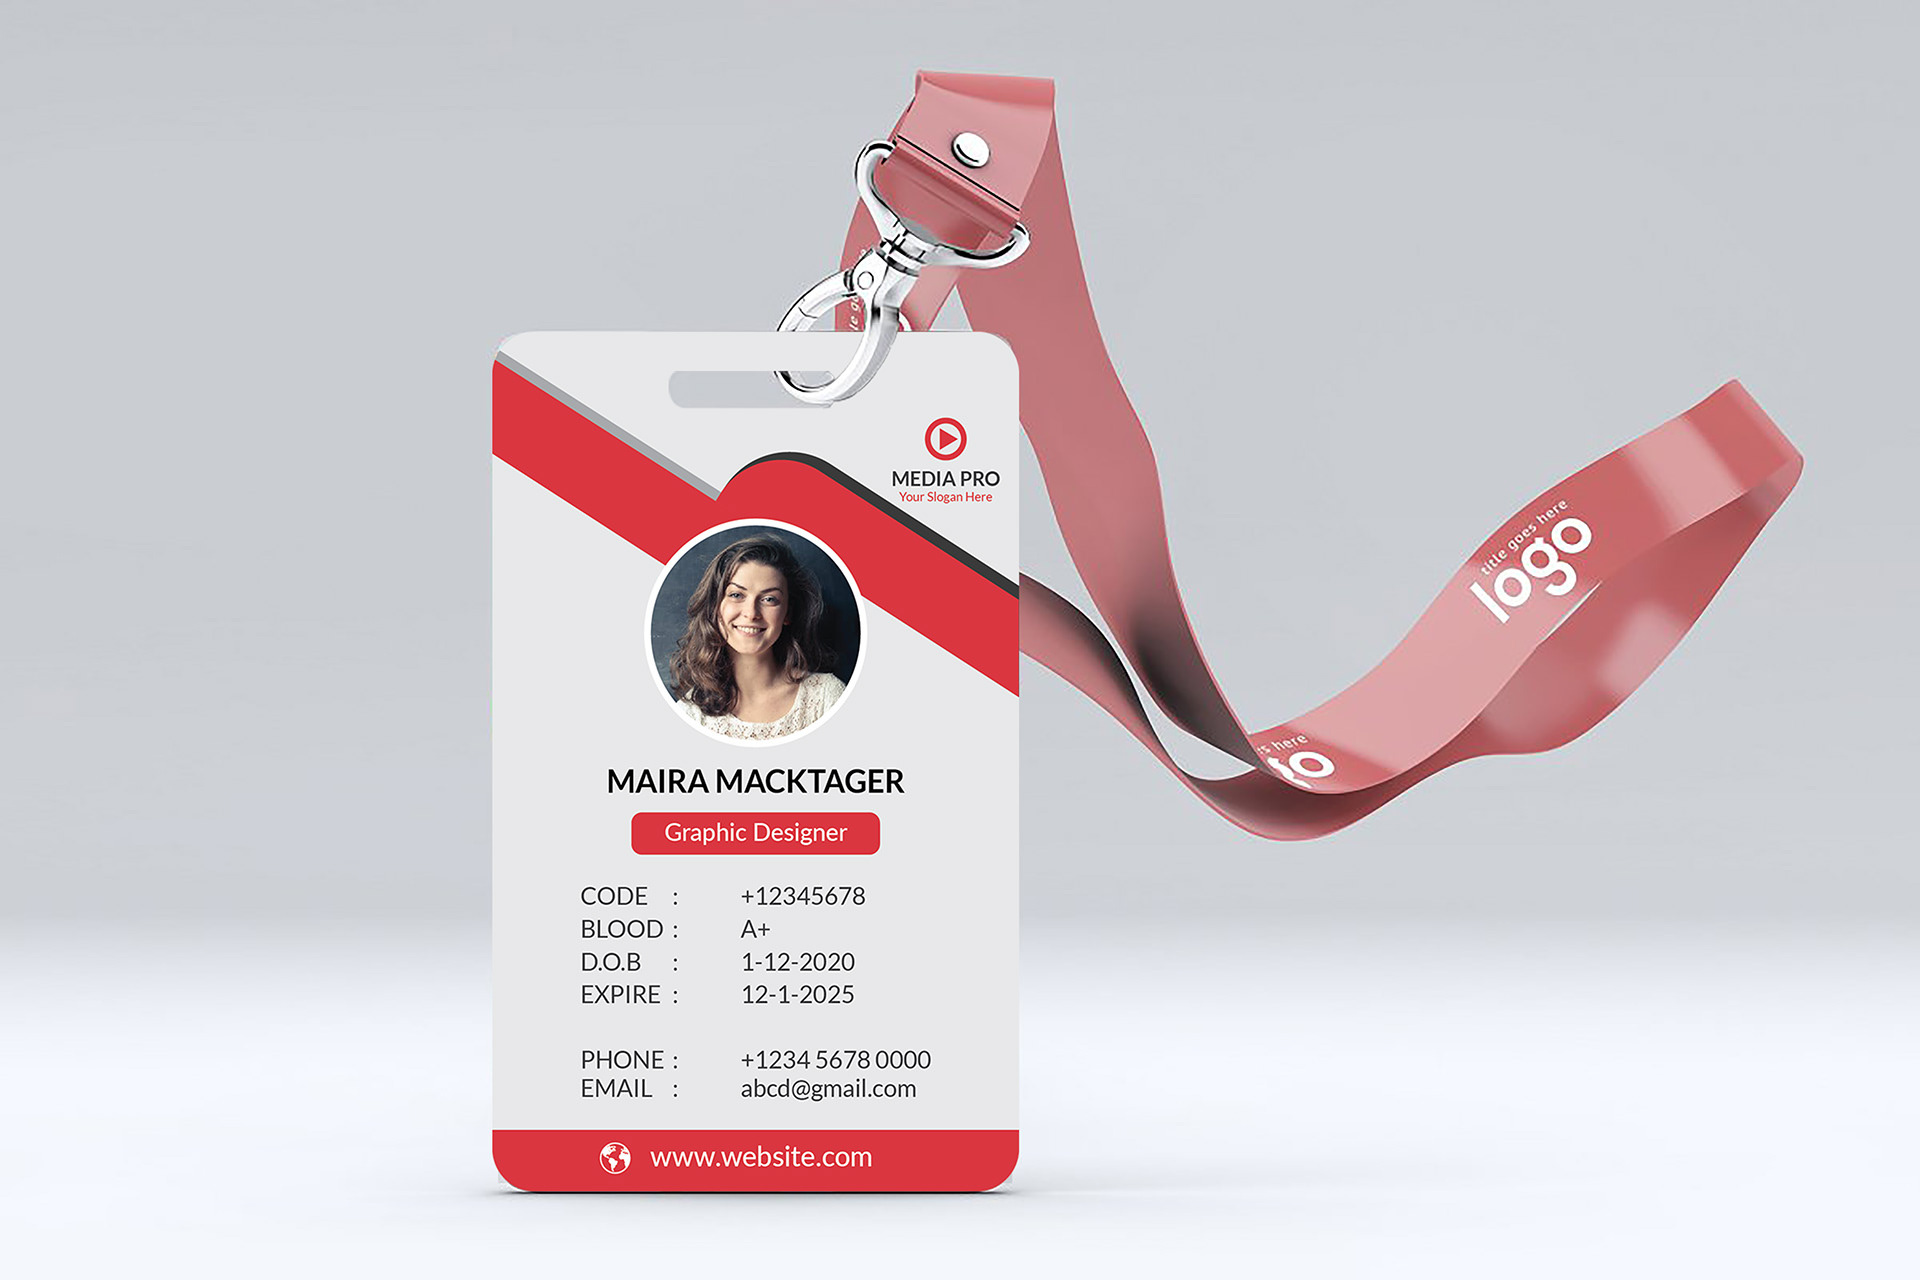 ID Card Free Mockup PSD Template 21 21 - Daily Mockup With College Id Card Template Psd